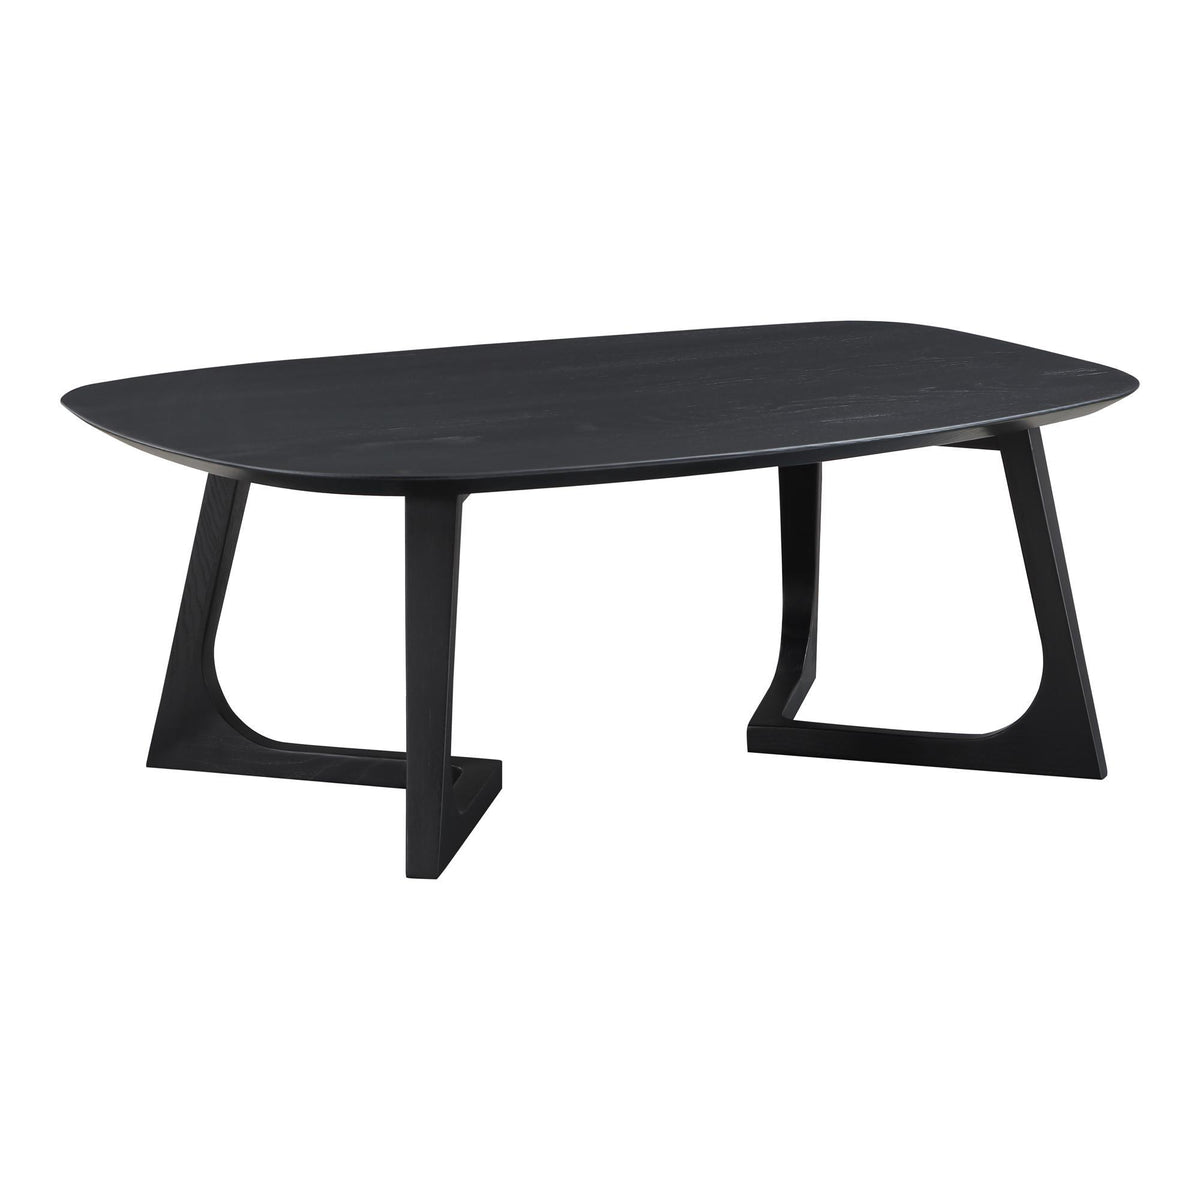 Moe's Home Collection Godenza Coffee Table Small Black Ash - CB-1005-02